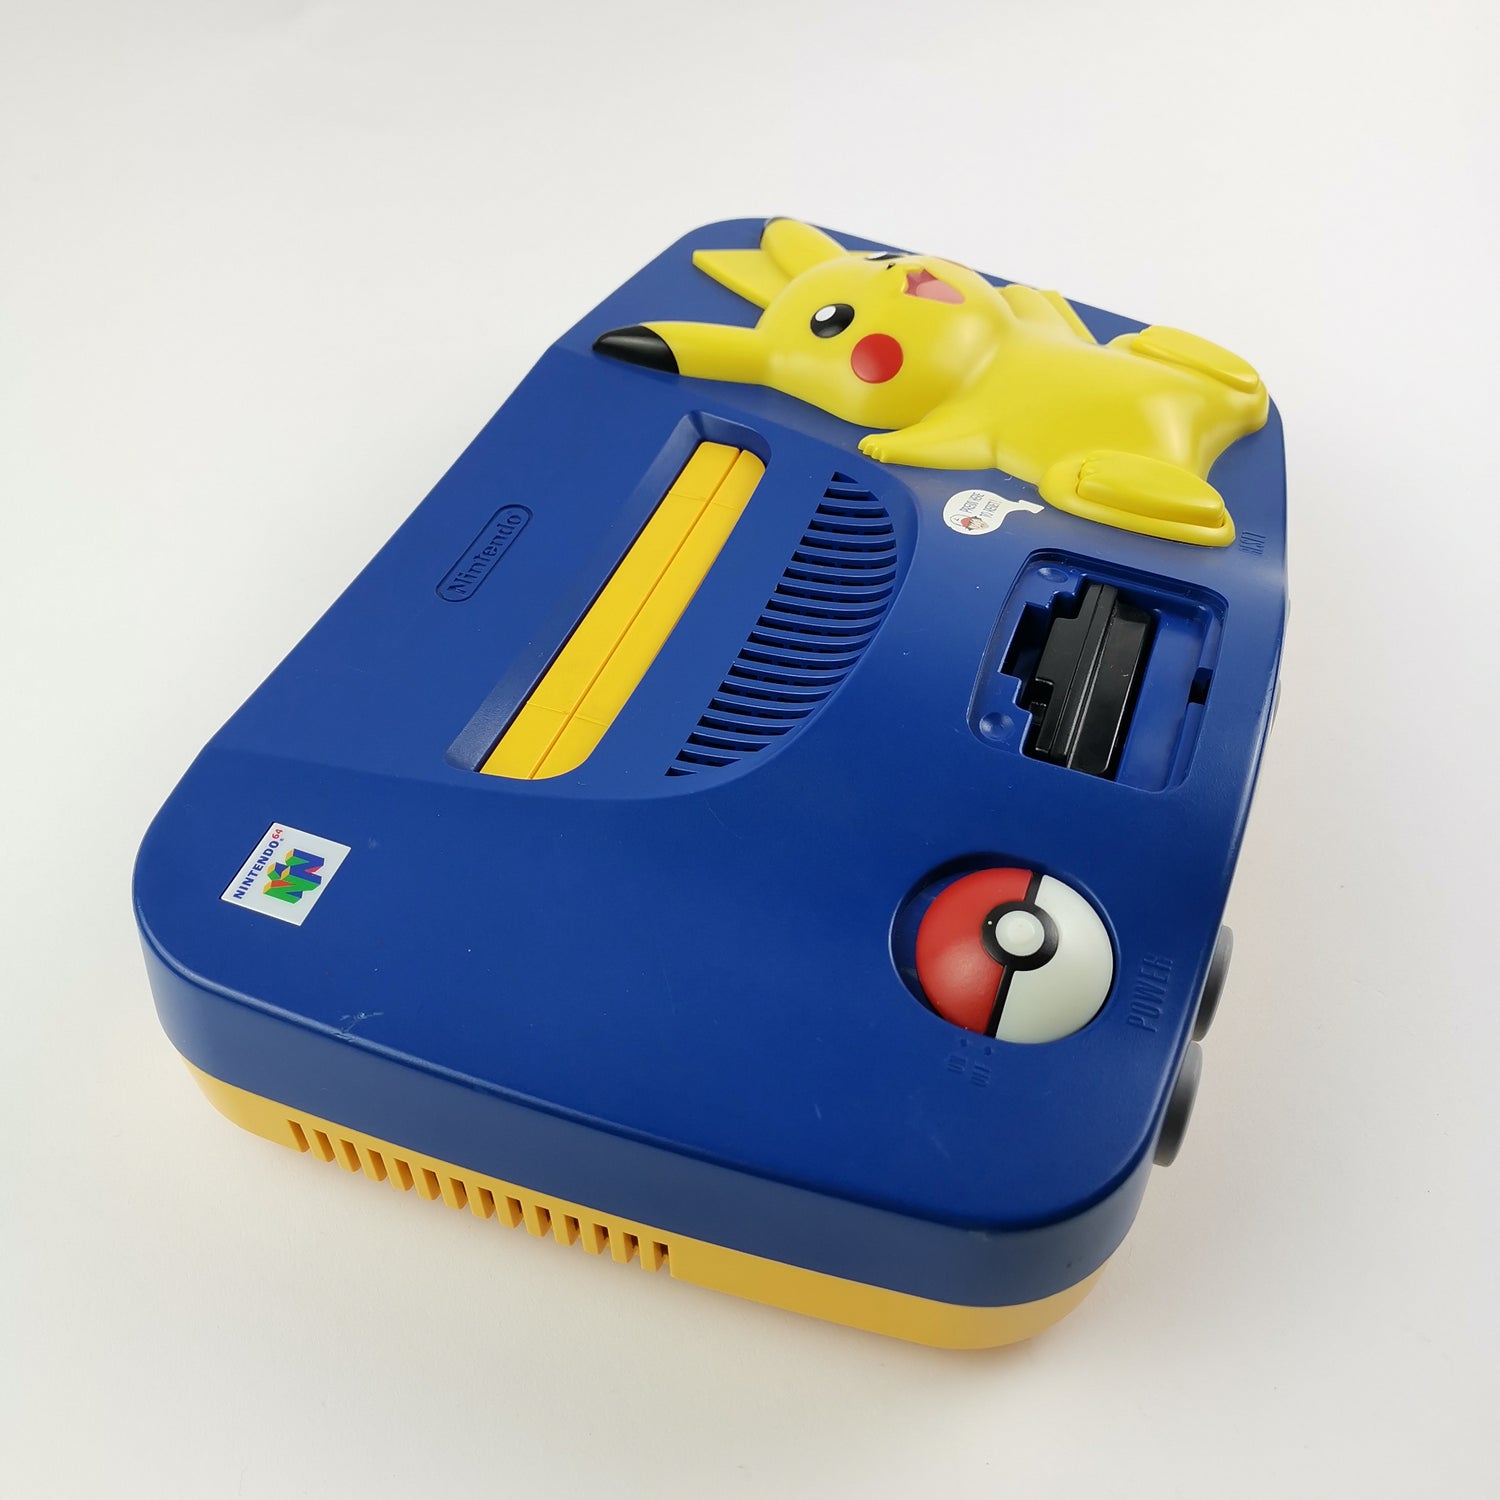 Nintendo 64 console: Pokemon Pikachu Edition with original controller and cable